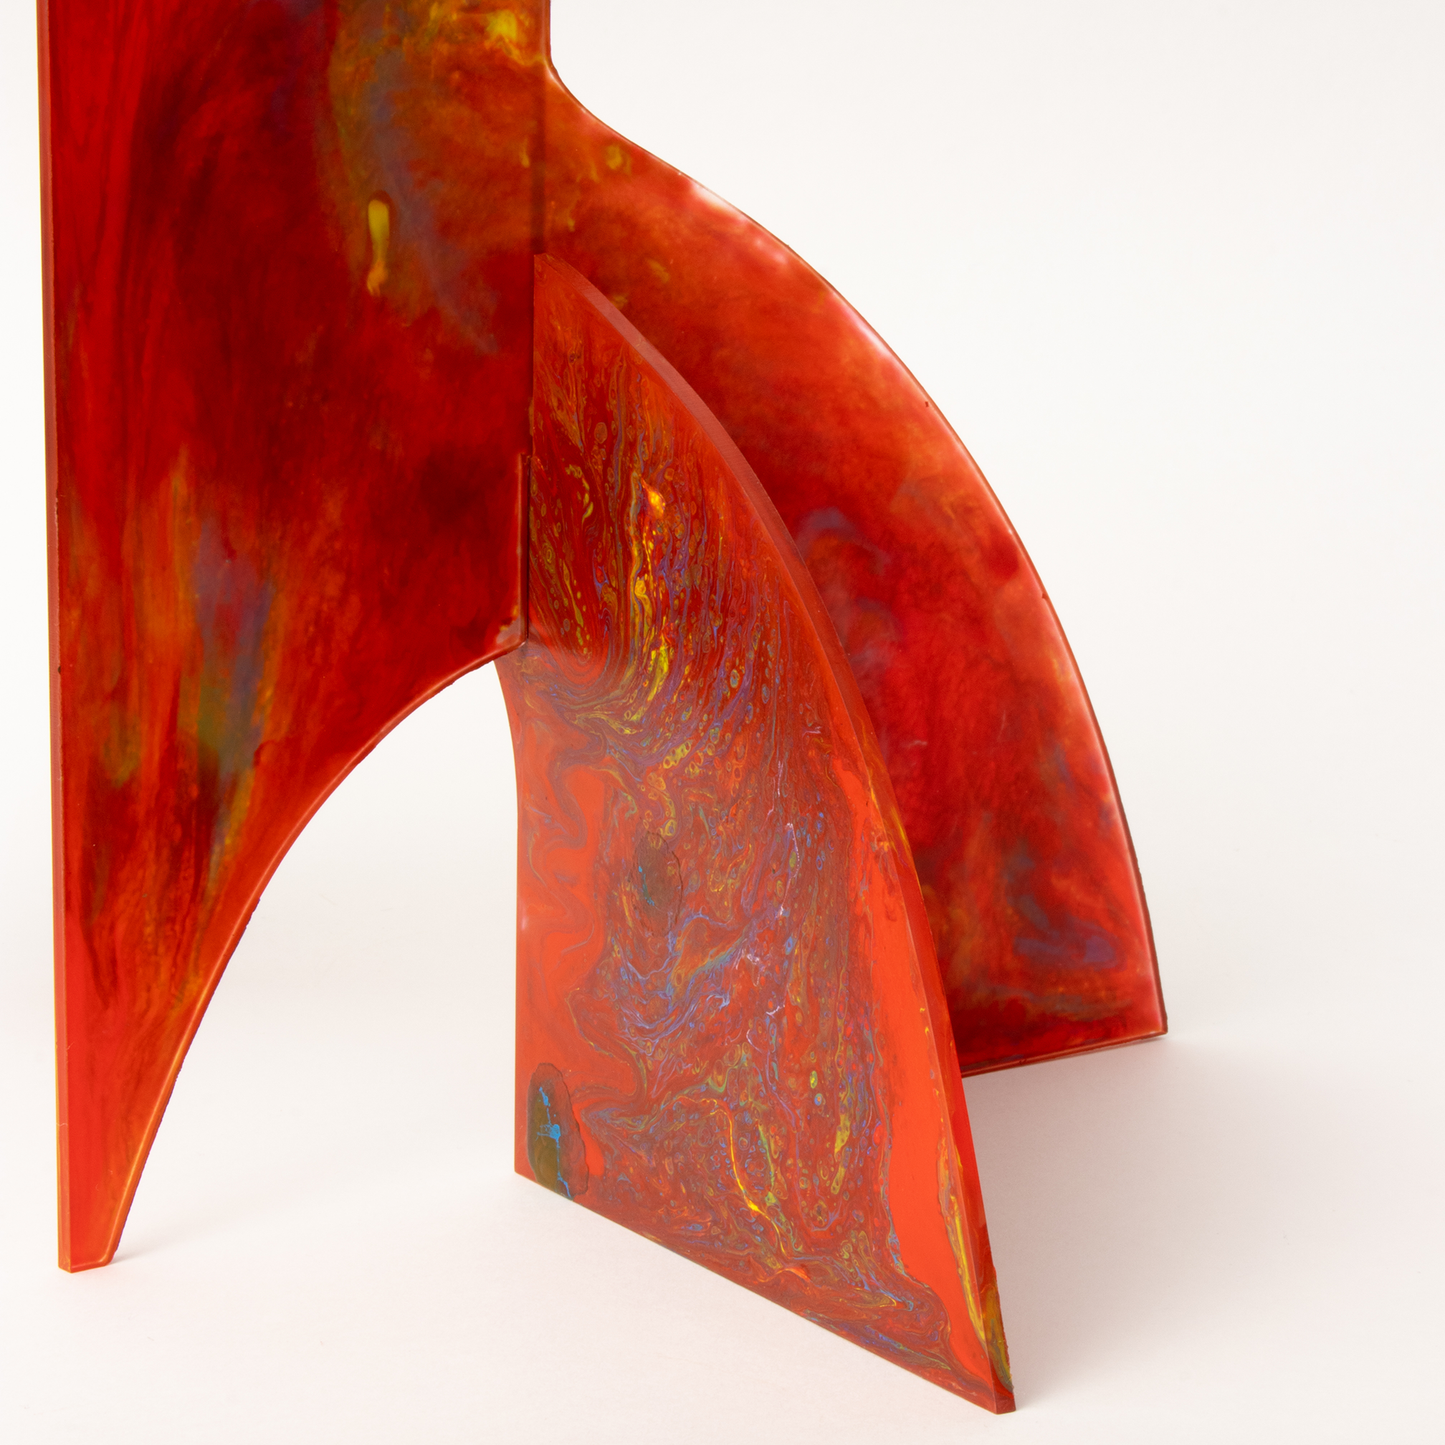 Beautiful stunning Red Hand Painted Modern Art Stabile Sculpture by AtomicMobiles.com